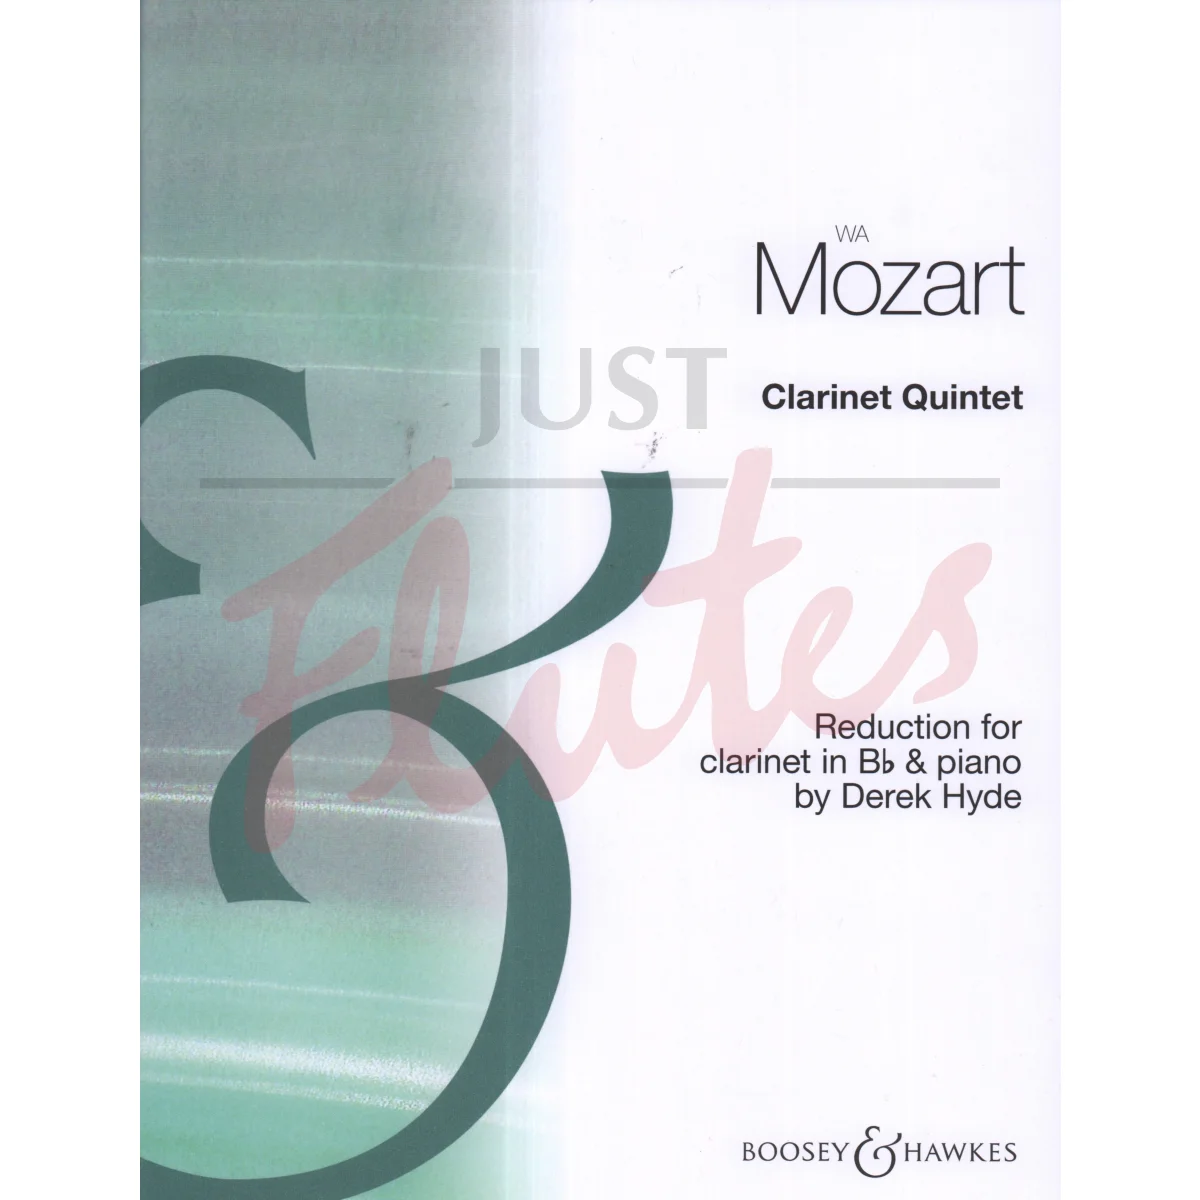 Clarinet Quintet for Clarinet and Piano